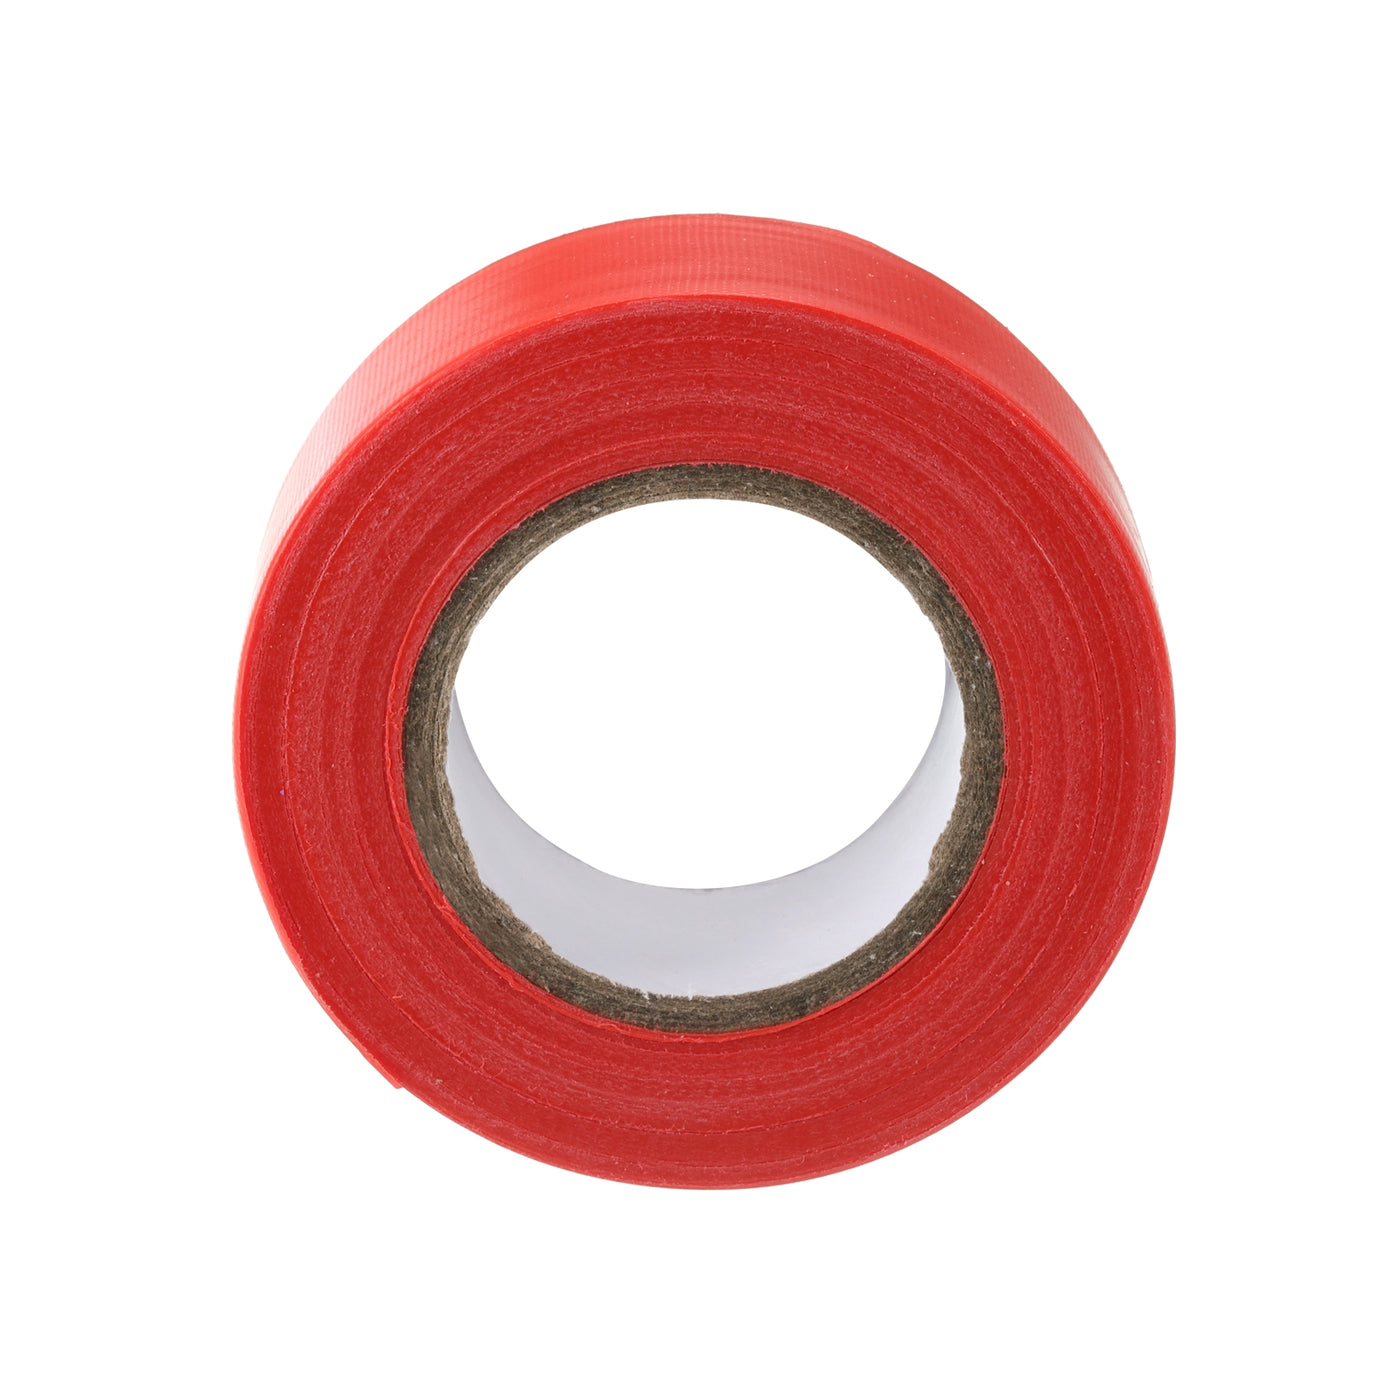 uxcell Uxcell PVC Flagging Tape 25mm x 30m/98.4ft Marking Tape Non-Adhesive 8pcs